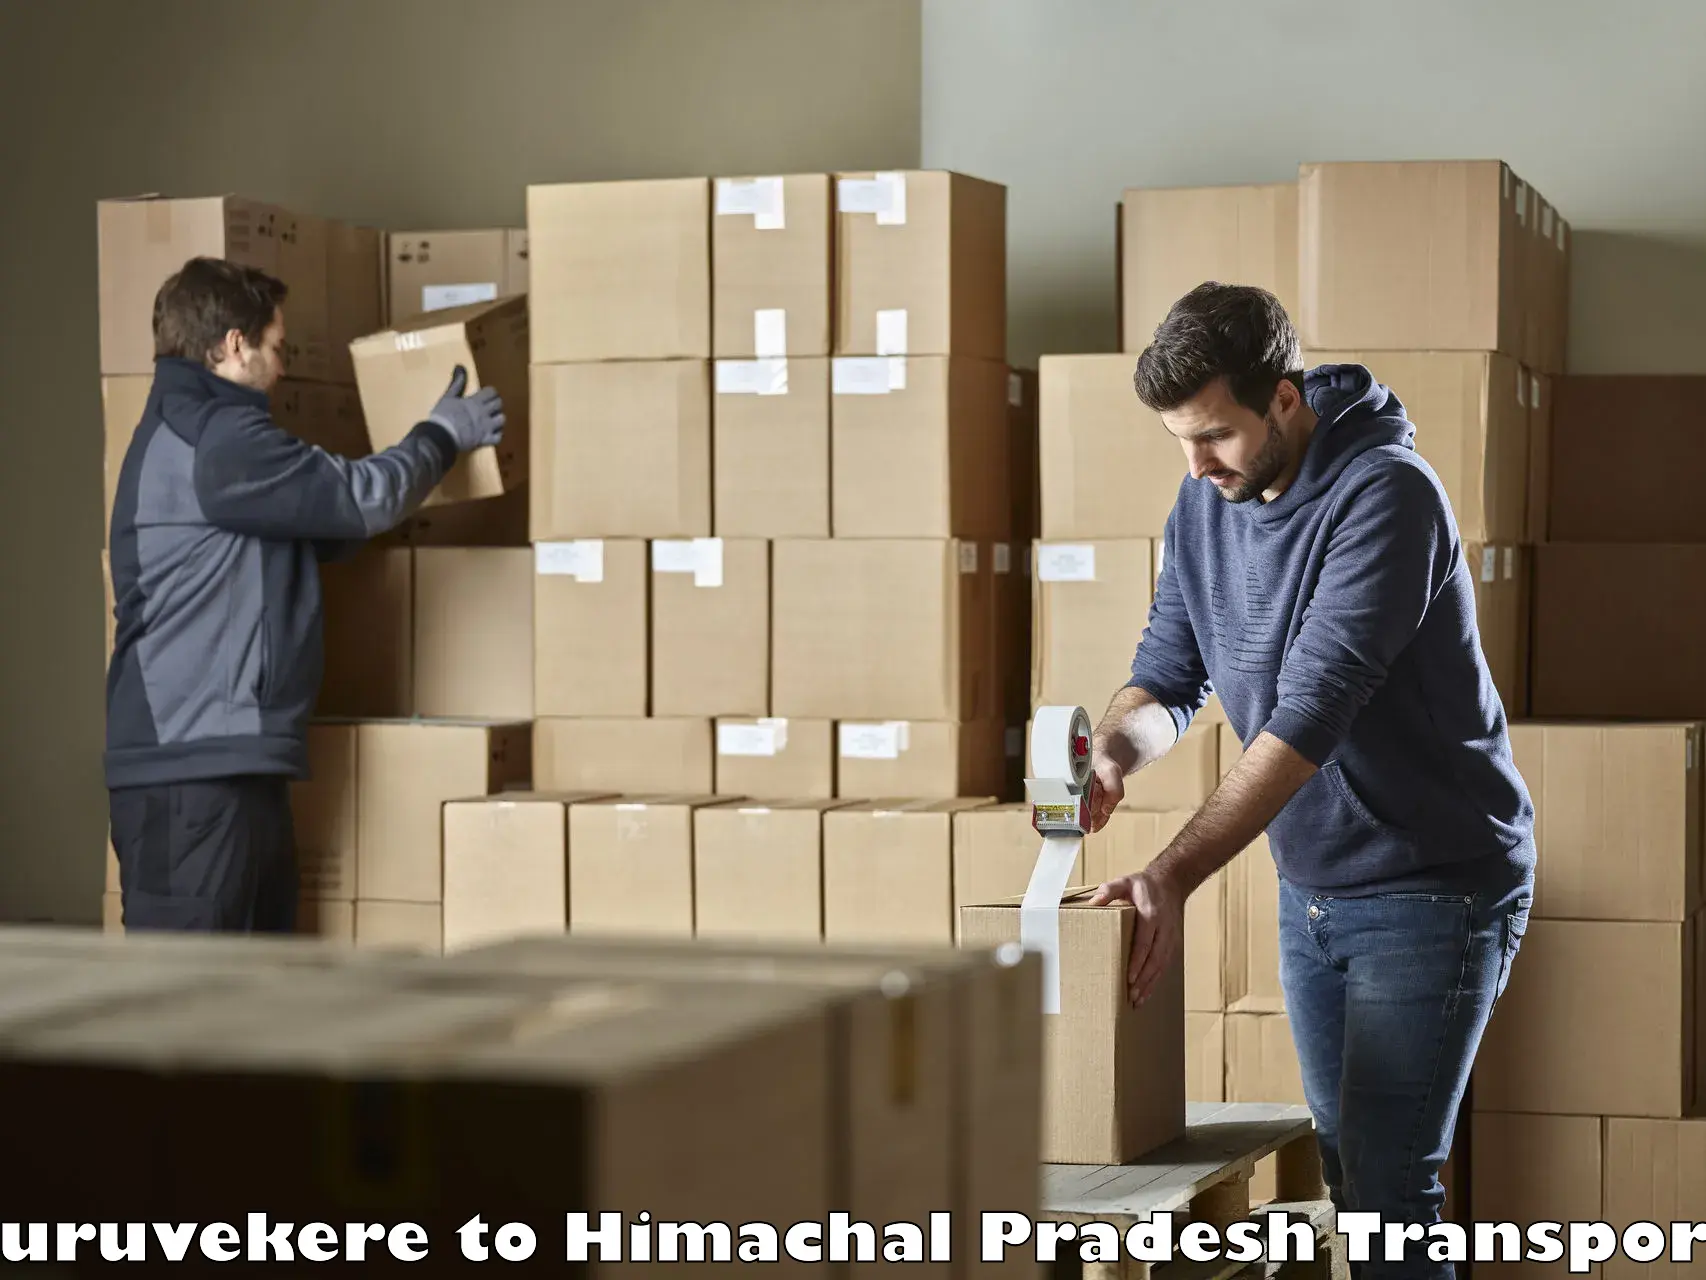 Part load transport service in India Turuvekere to Himachal Pradesh